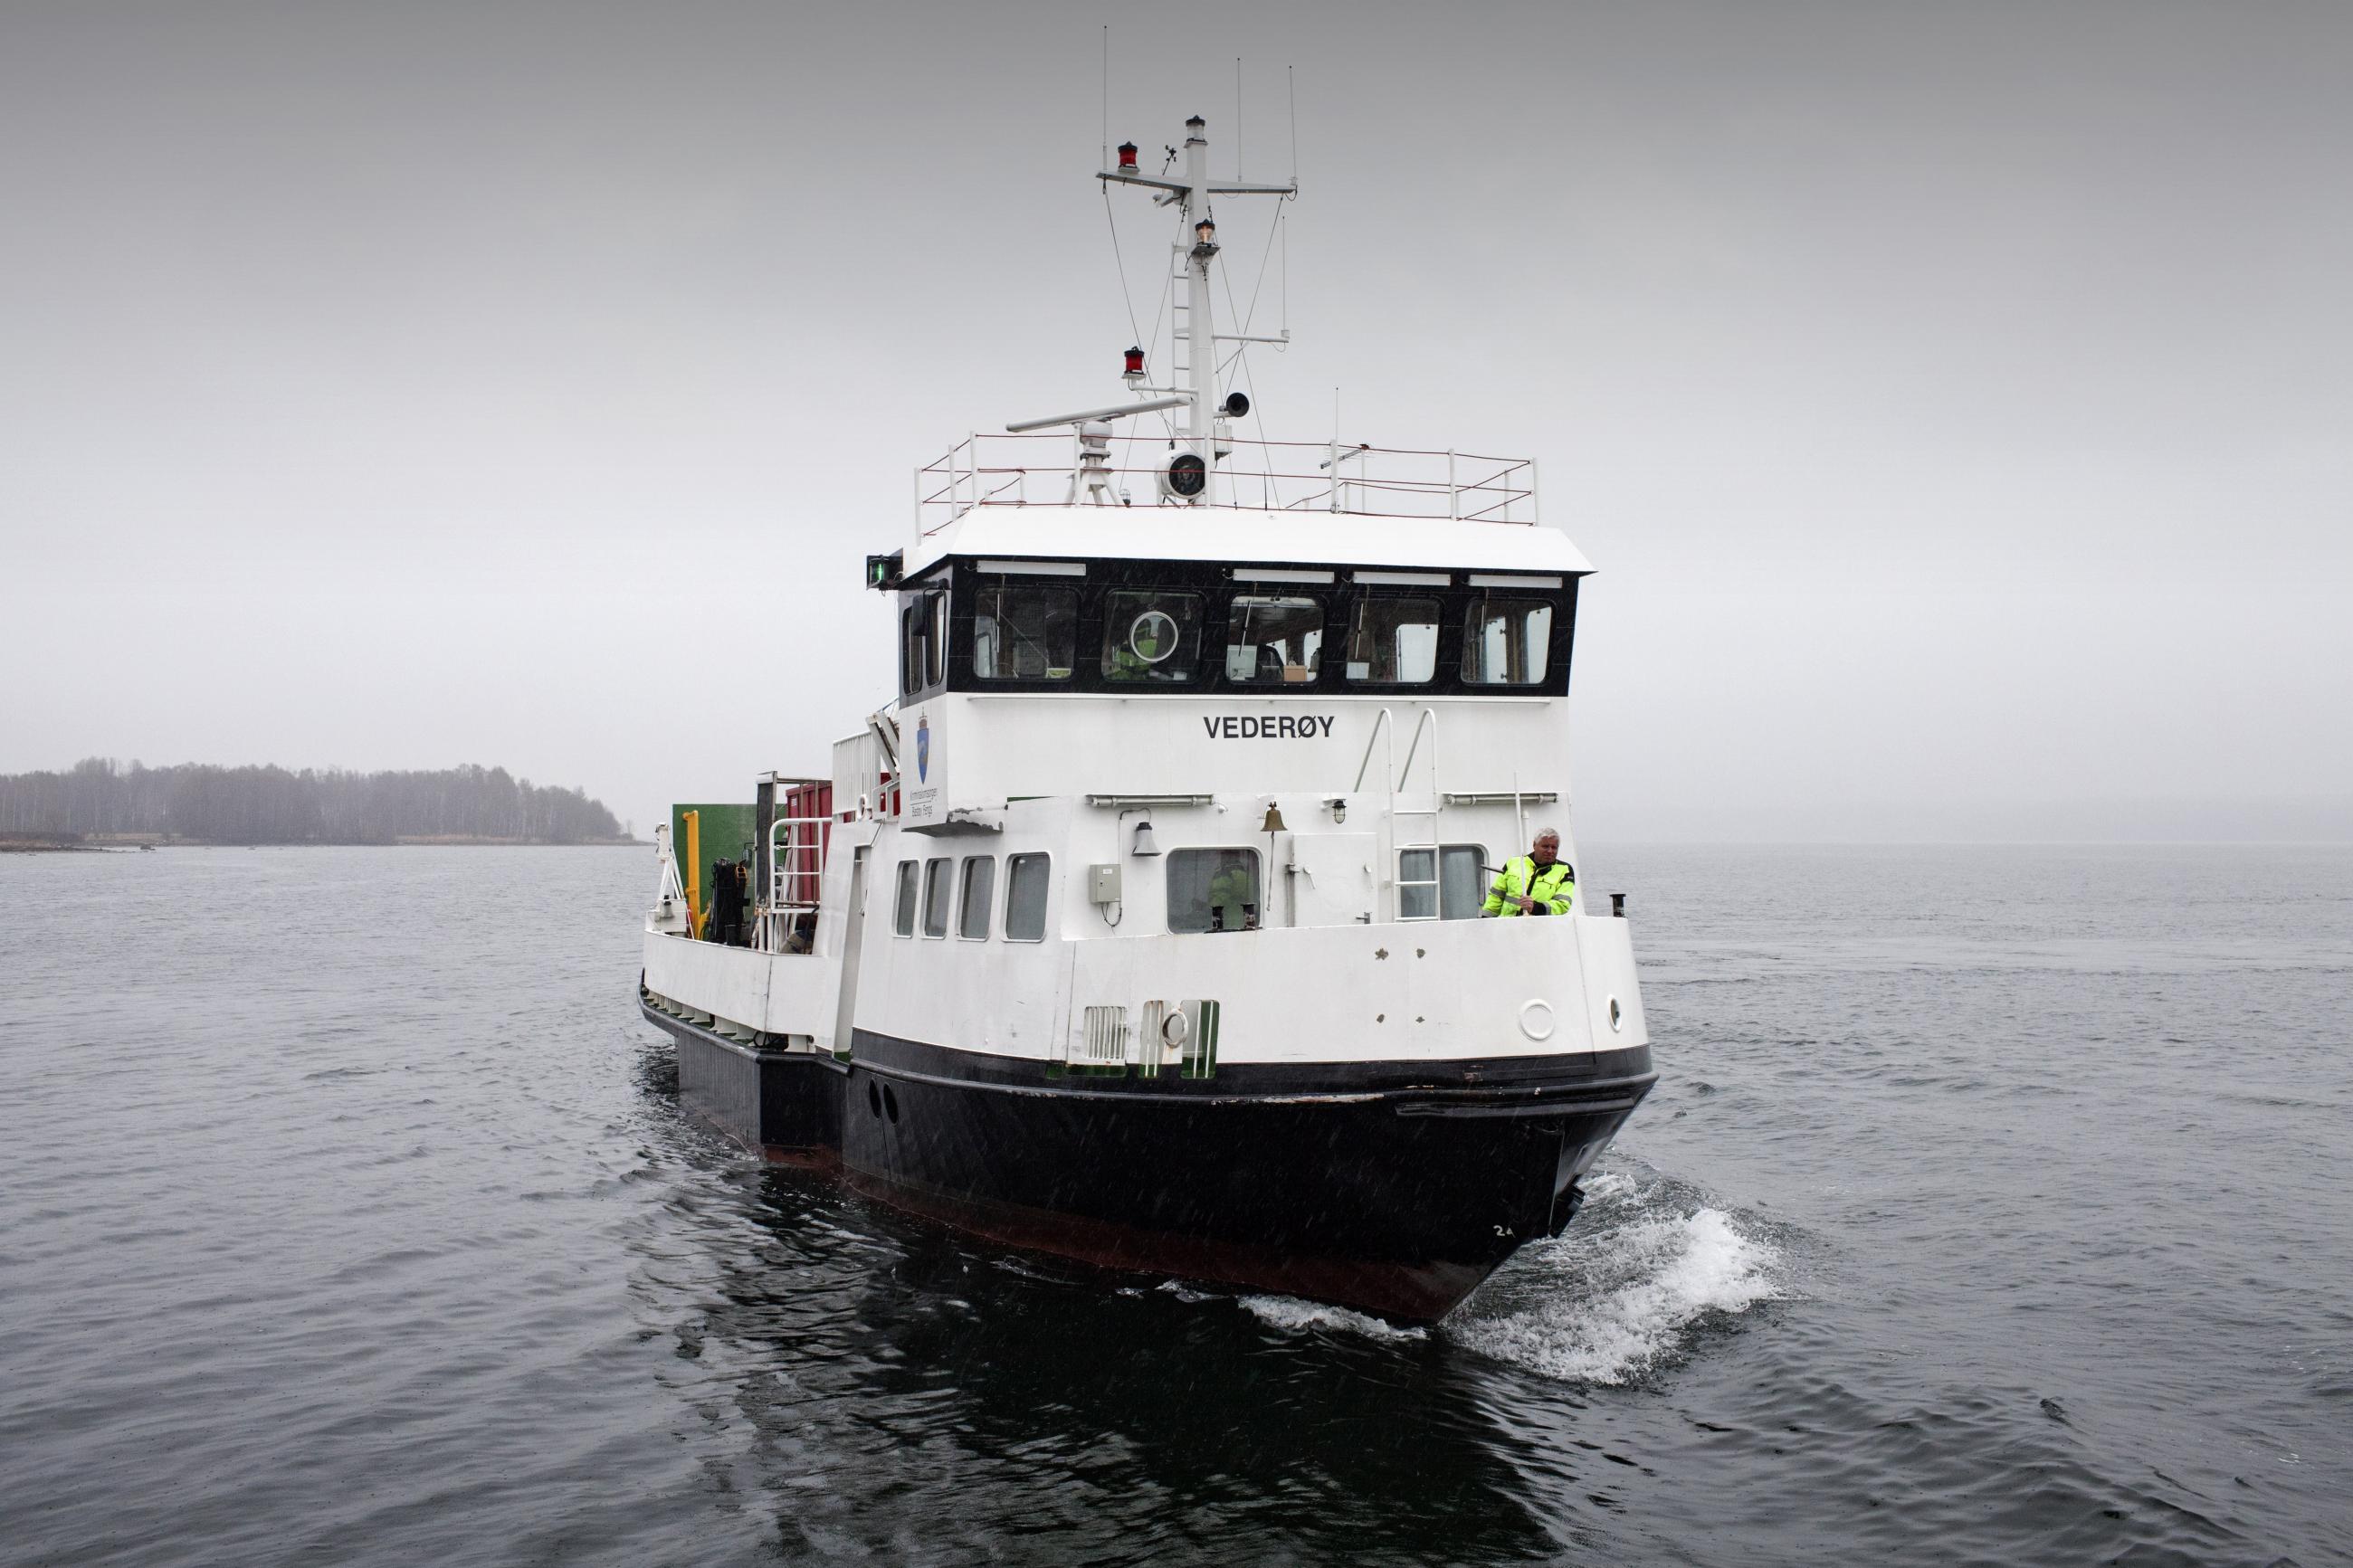 The ferry that travel from the mainland to Bastoy prison is seen as it approaches Bastøy Prison in Horten, Norway on April 12, 2011. 